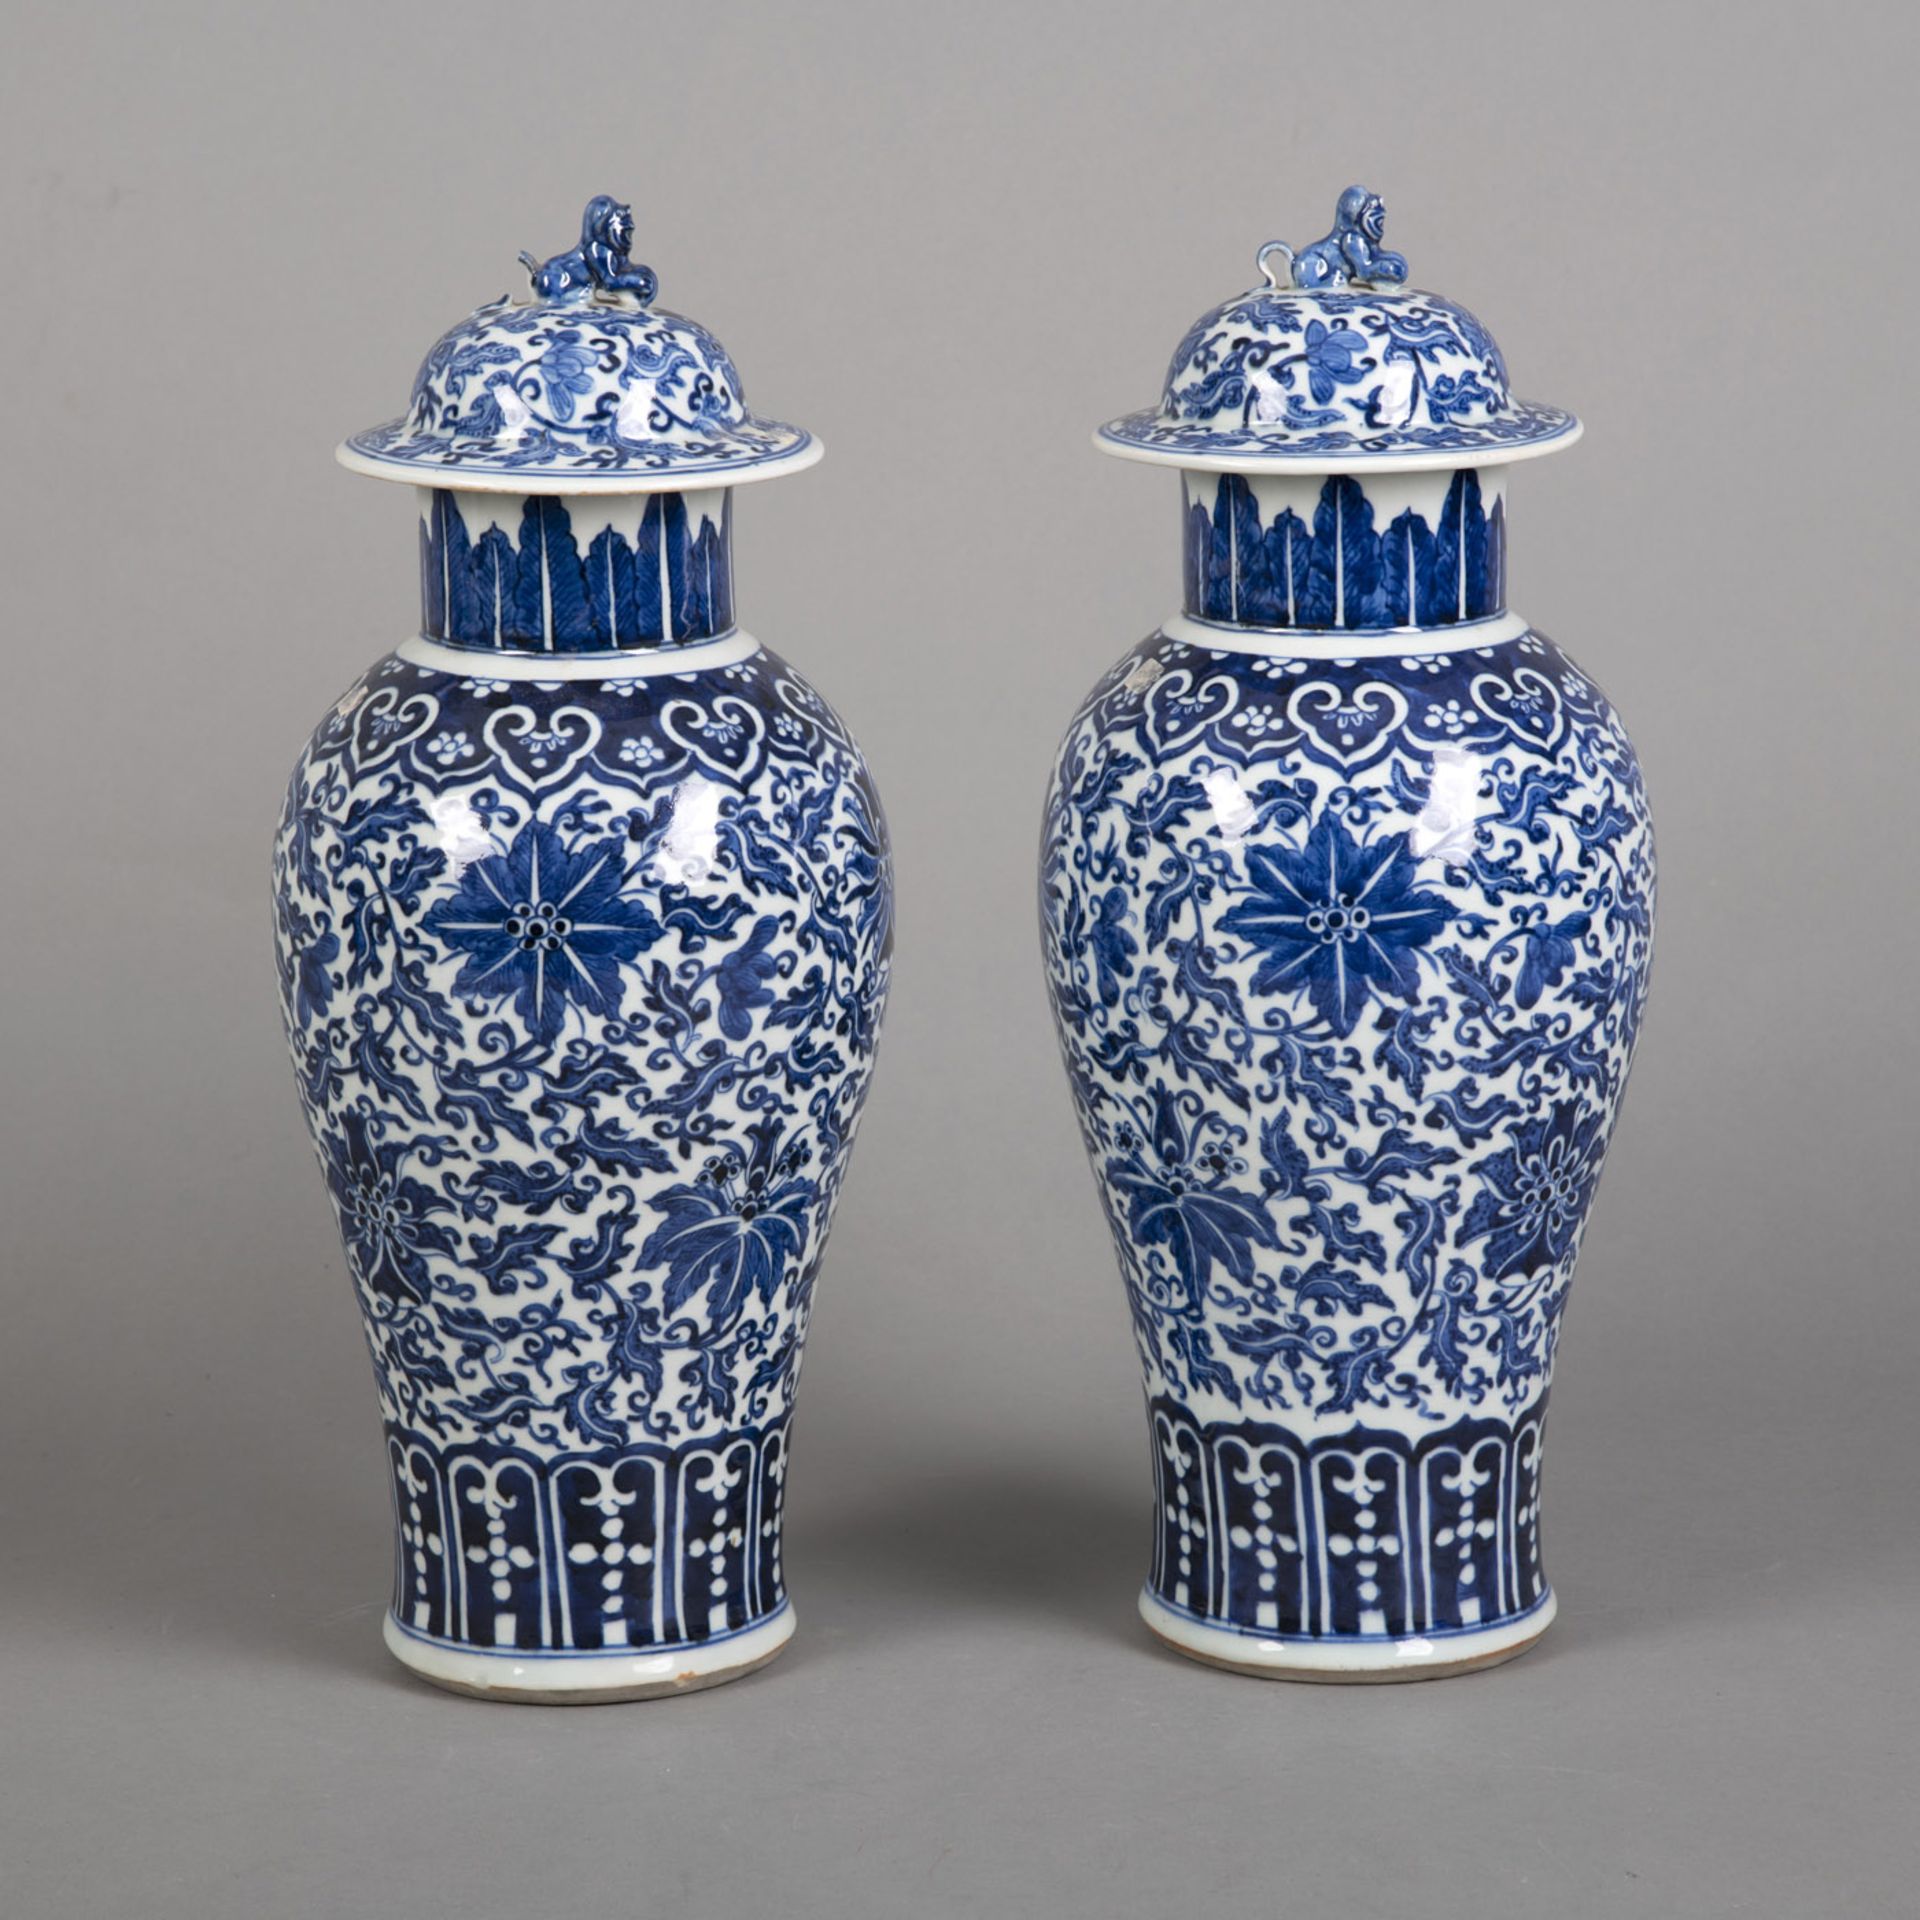 A PAIR OF BLUE AND WHITE PORCELAIN VASES WITH LION-HANDLED COVERS